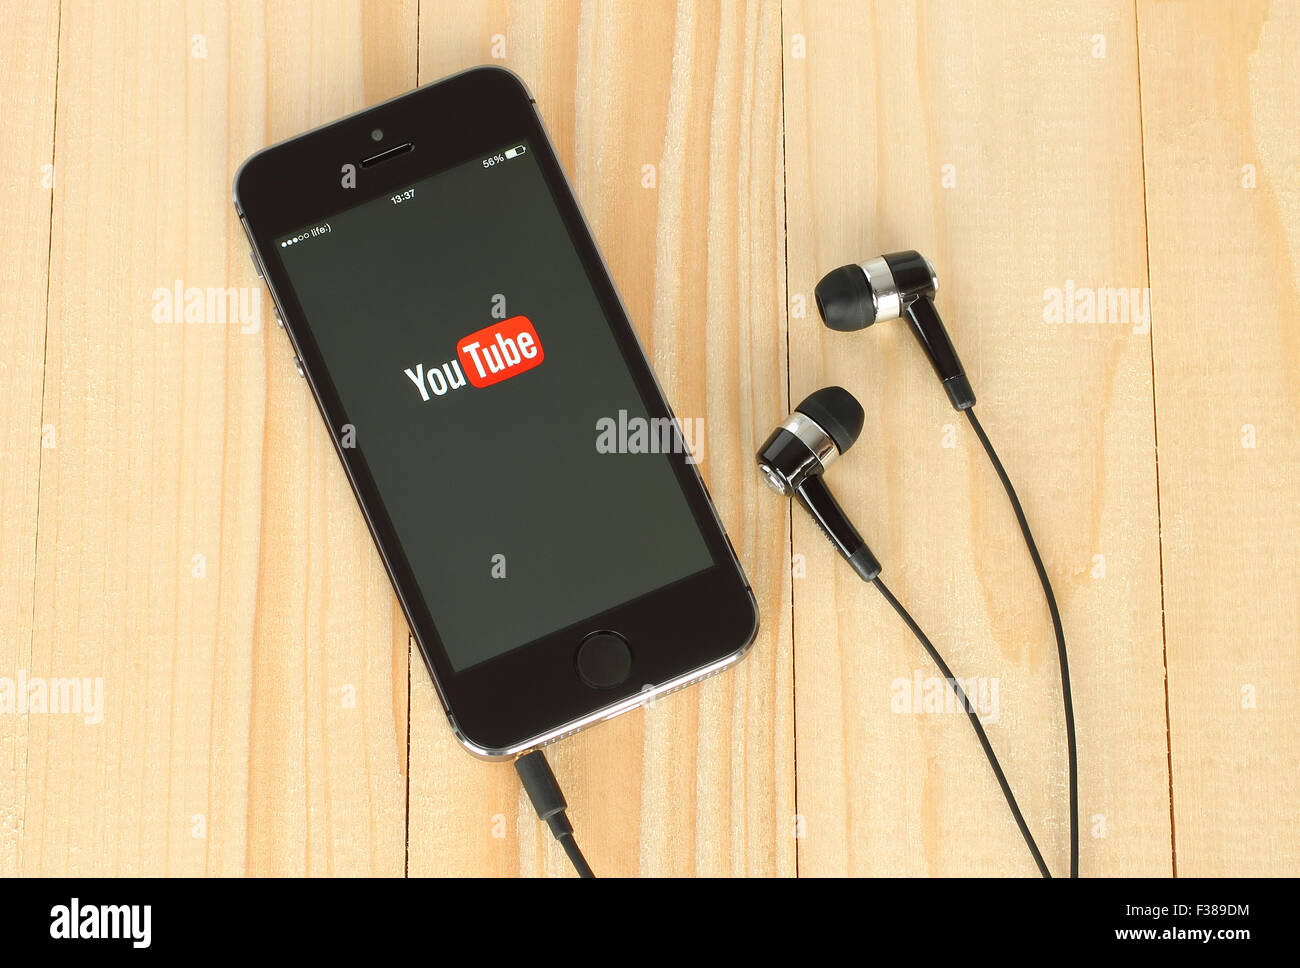 KIEV, UKRAINE - MAY 22, 2015: Smart phone with YouTube logo on its screen and headphones on wooden background Stock Photo